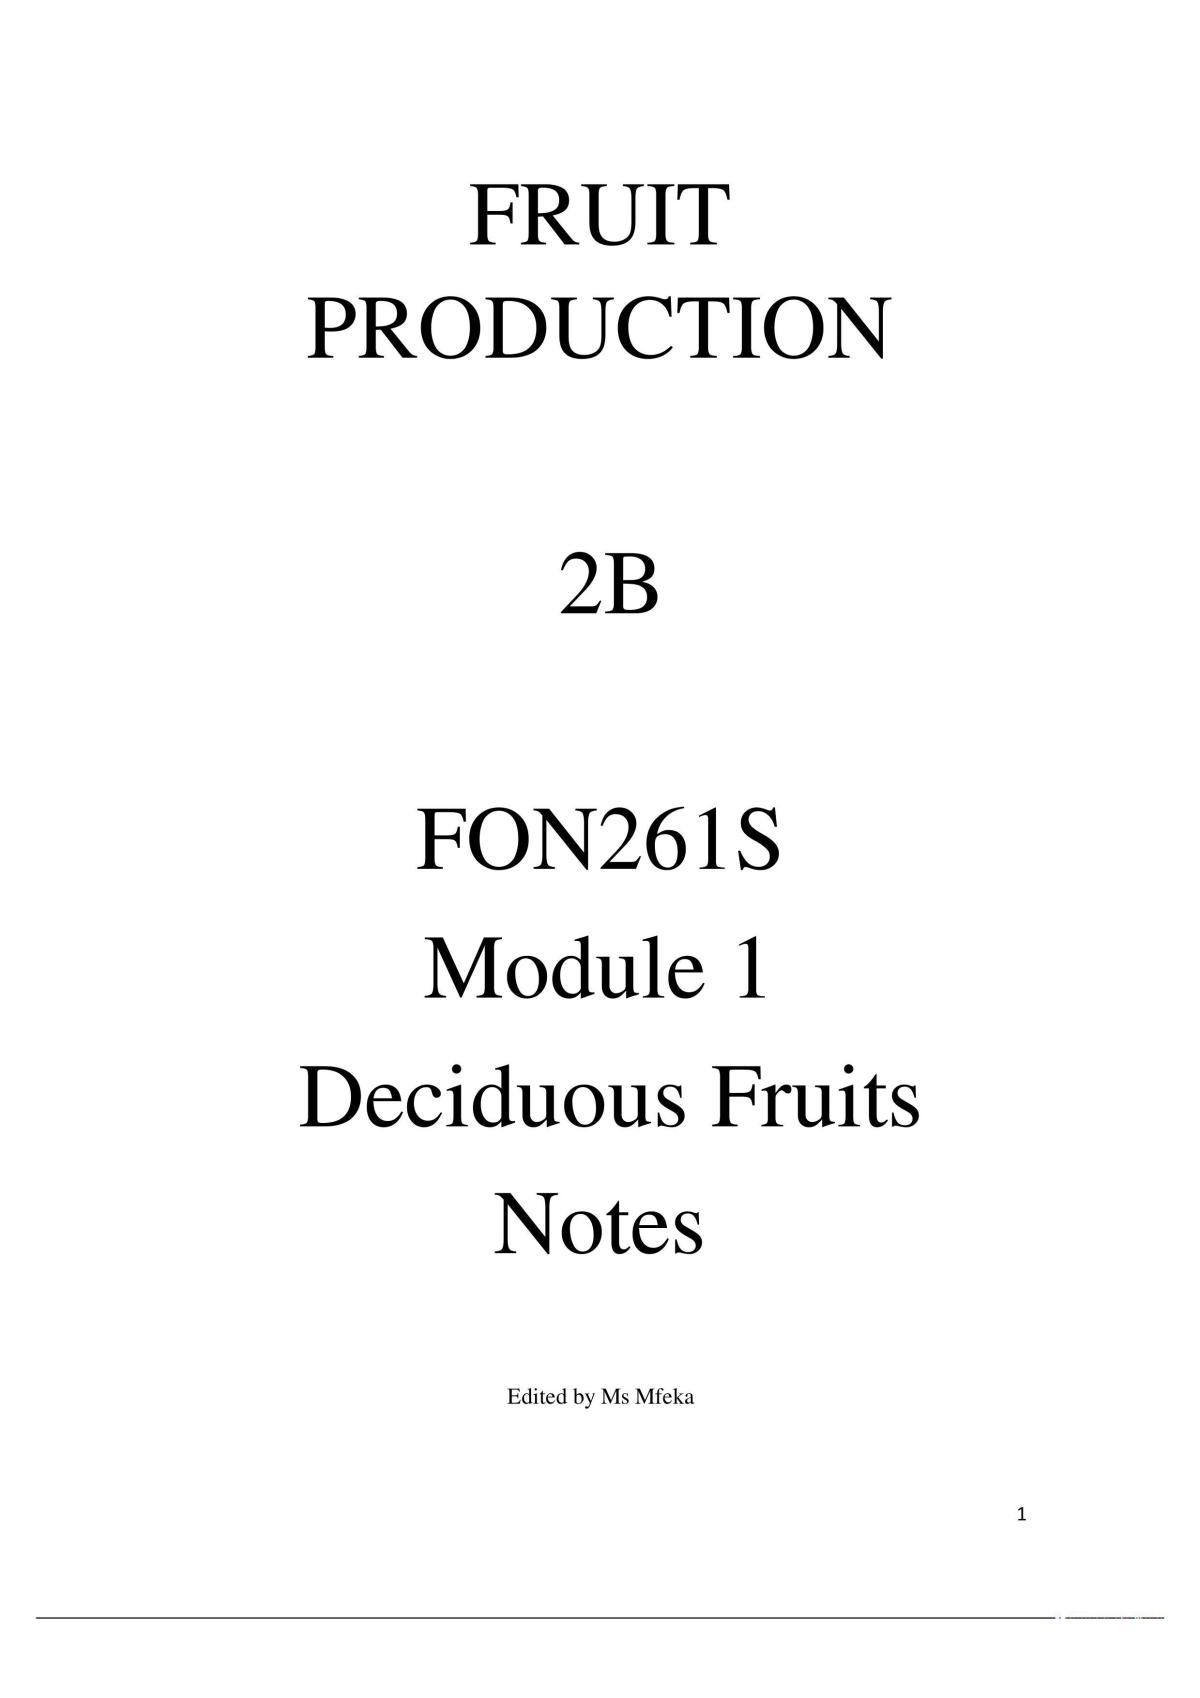 Fruit Production Notes - Page 1